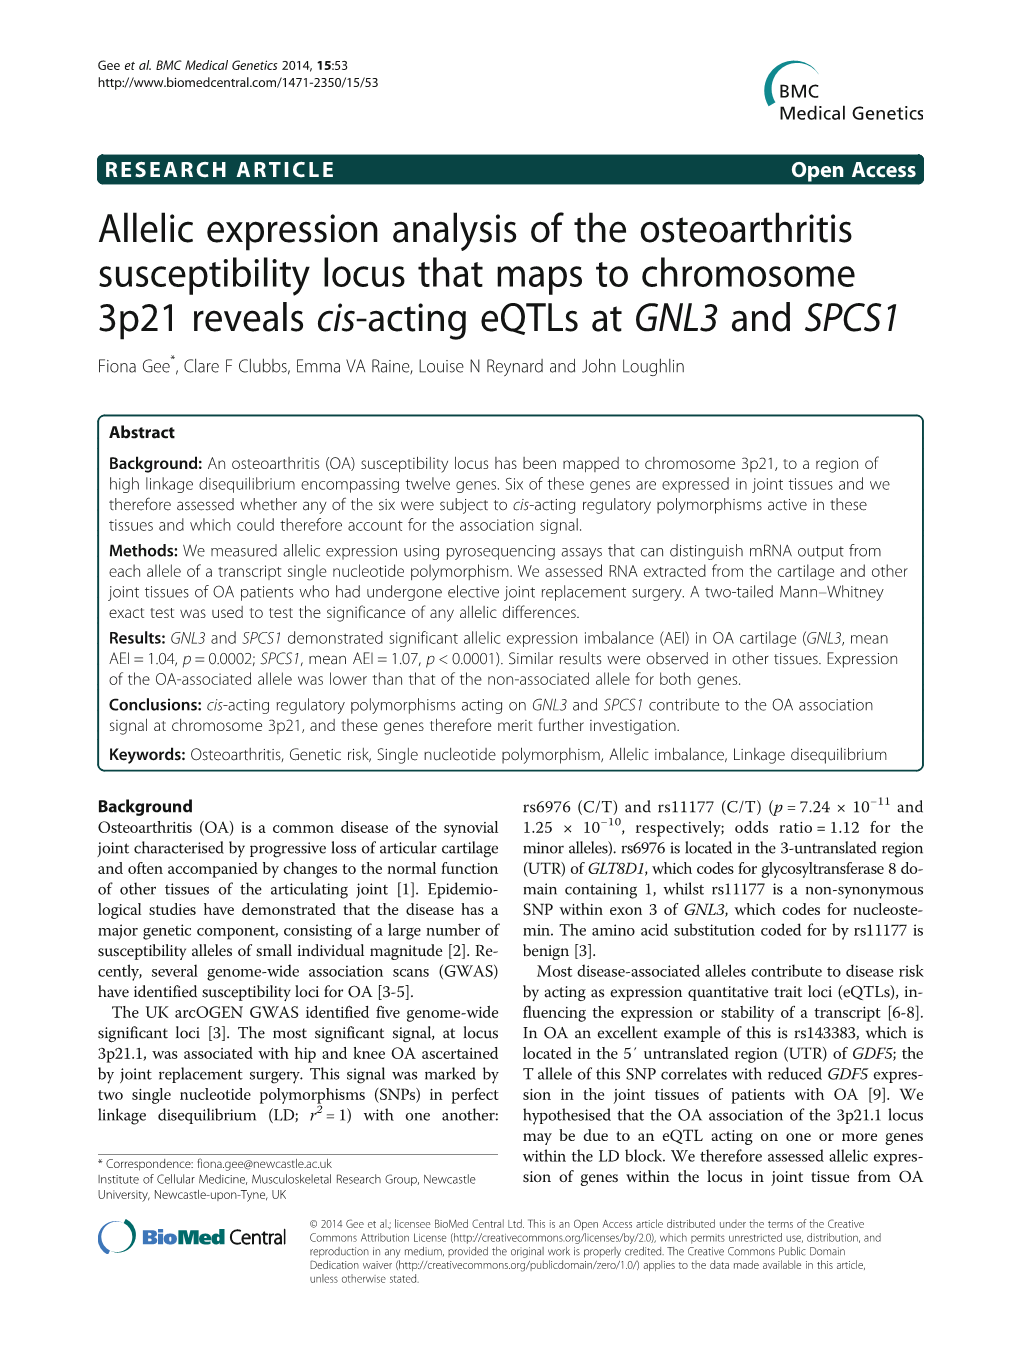 Allelic Expression Analysis of the Osteoarthritis Susceptibility Locus